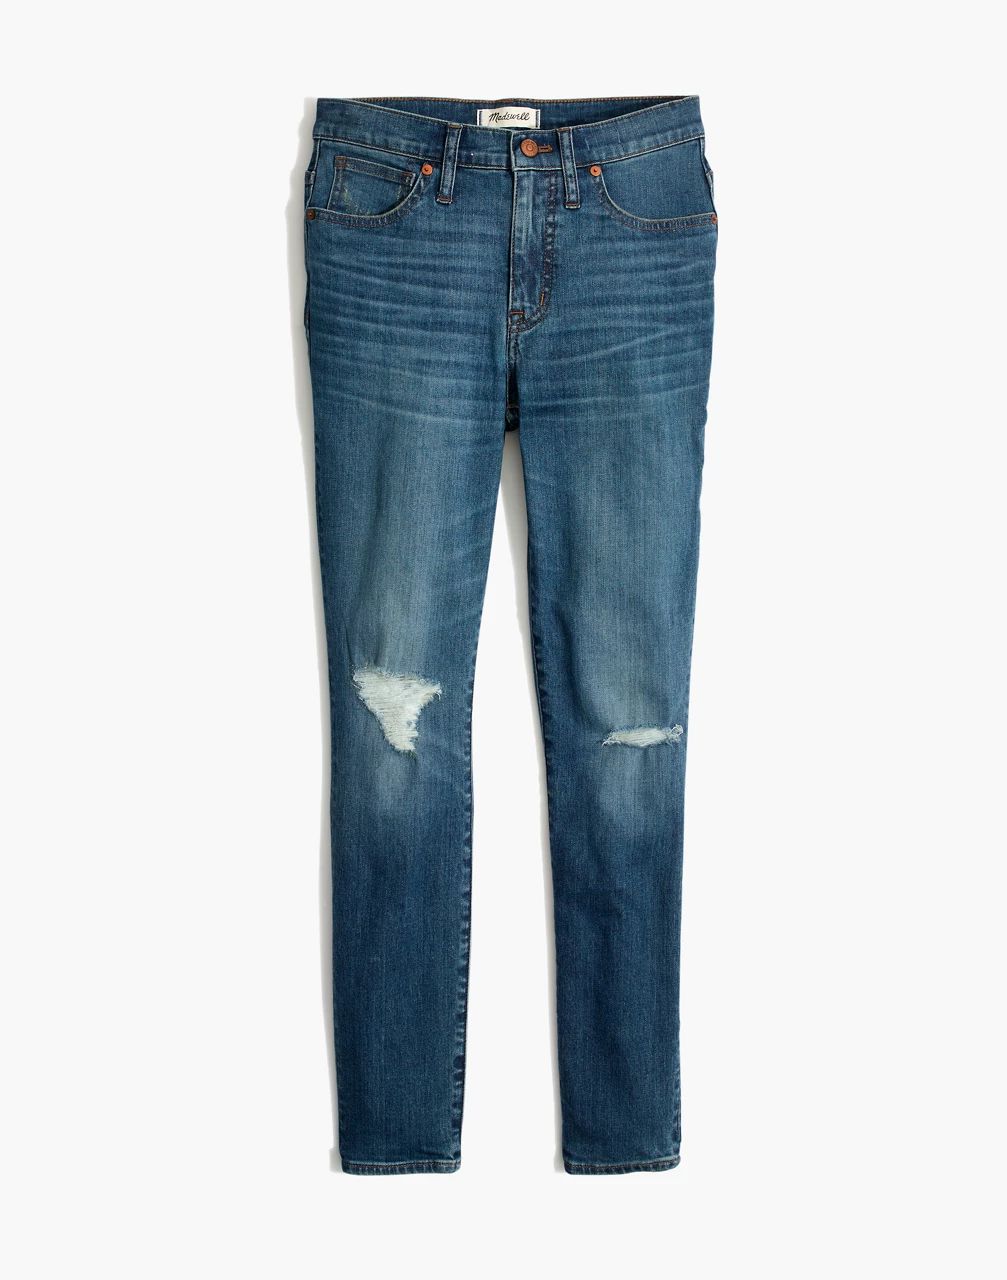 9" High-Rise Skinny Crop Jeans in Delmar Wash: Eco Edition | Madewell